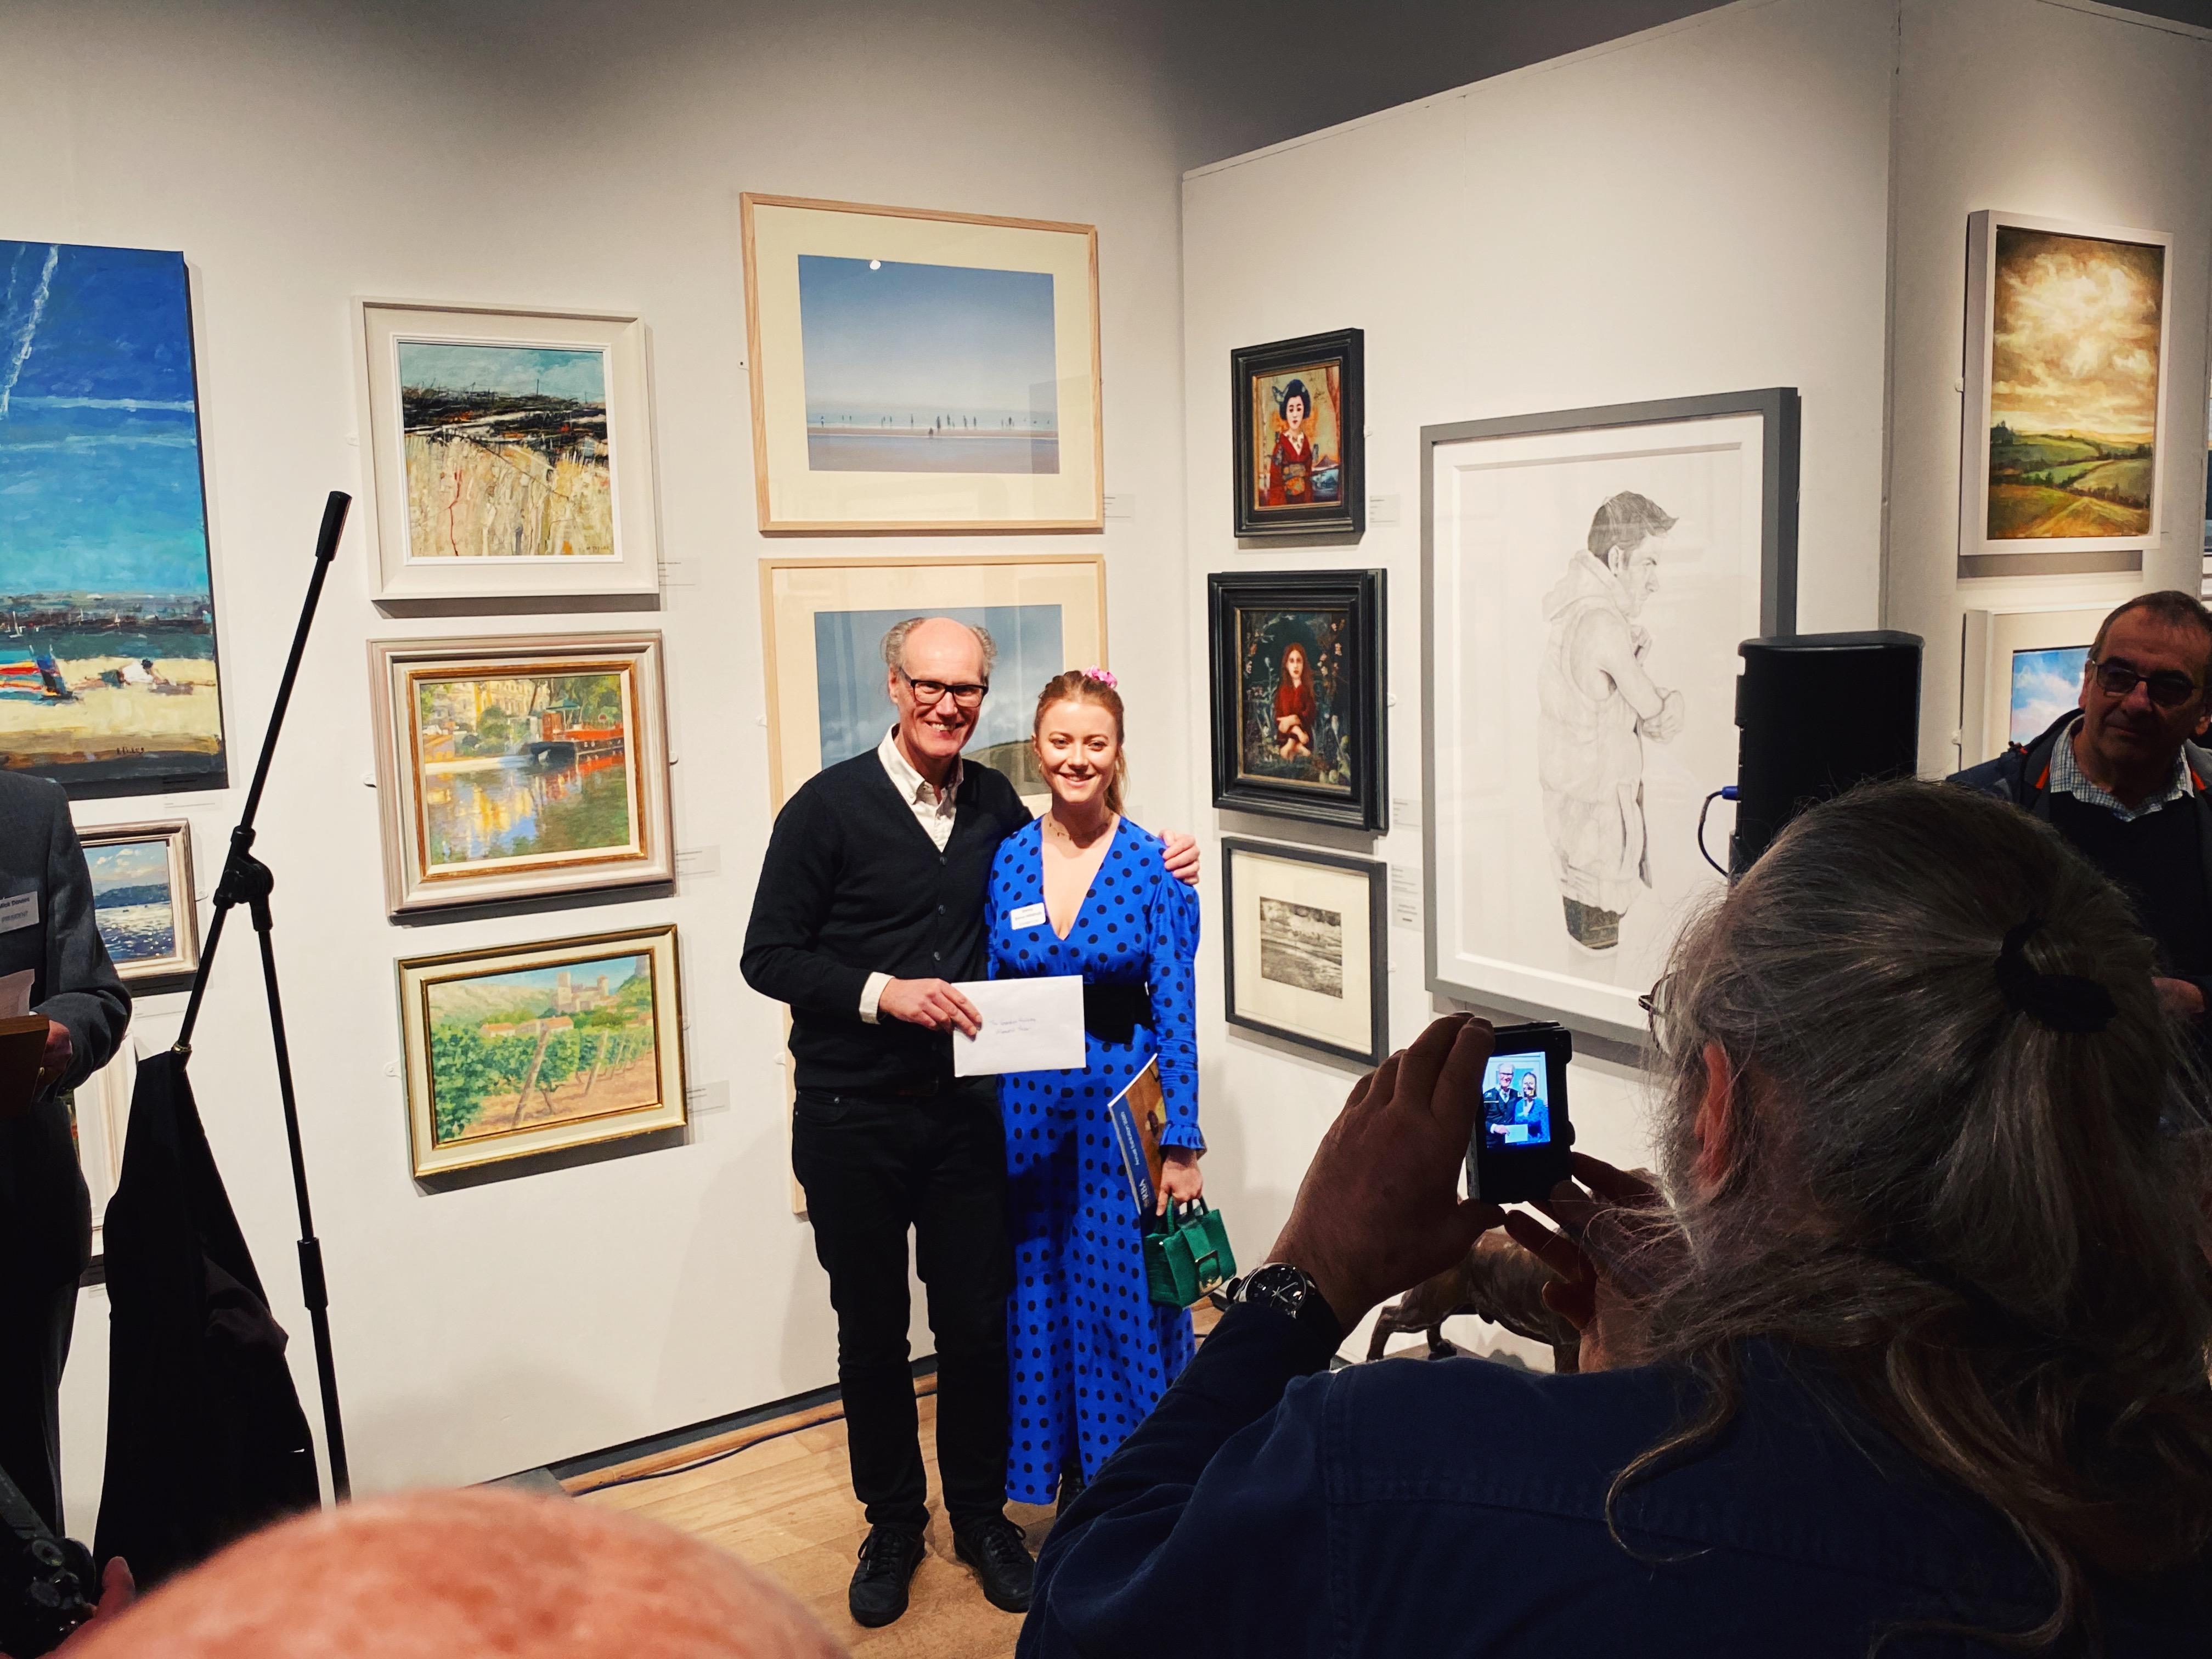 Daisy was honoured to receive the Gordon Hulson Memorial Prize presented by BBC Arts Editor Will Gompertz at the Royal Society of British Artists Annual Exhibition